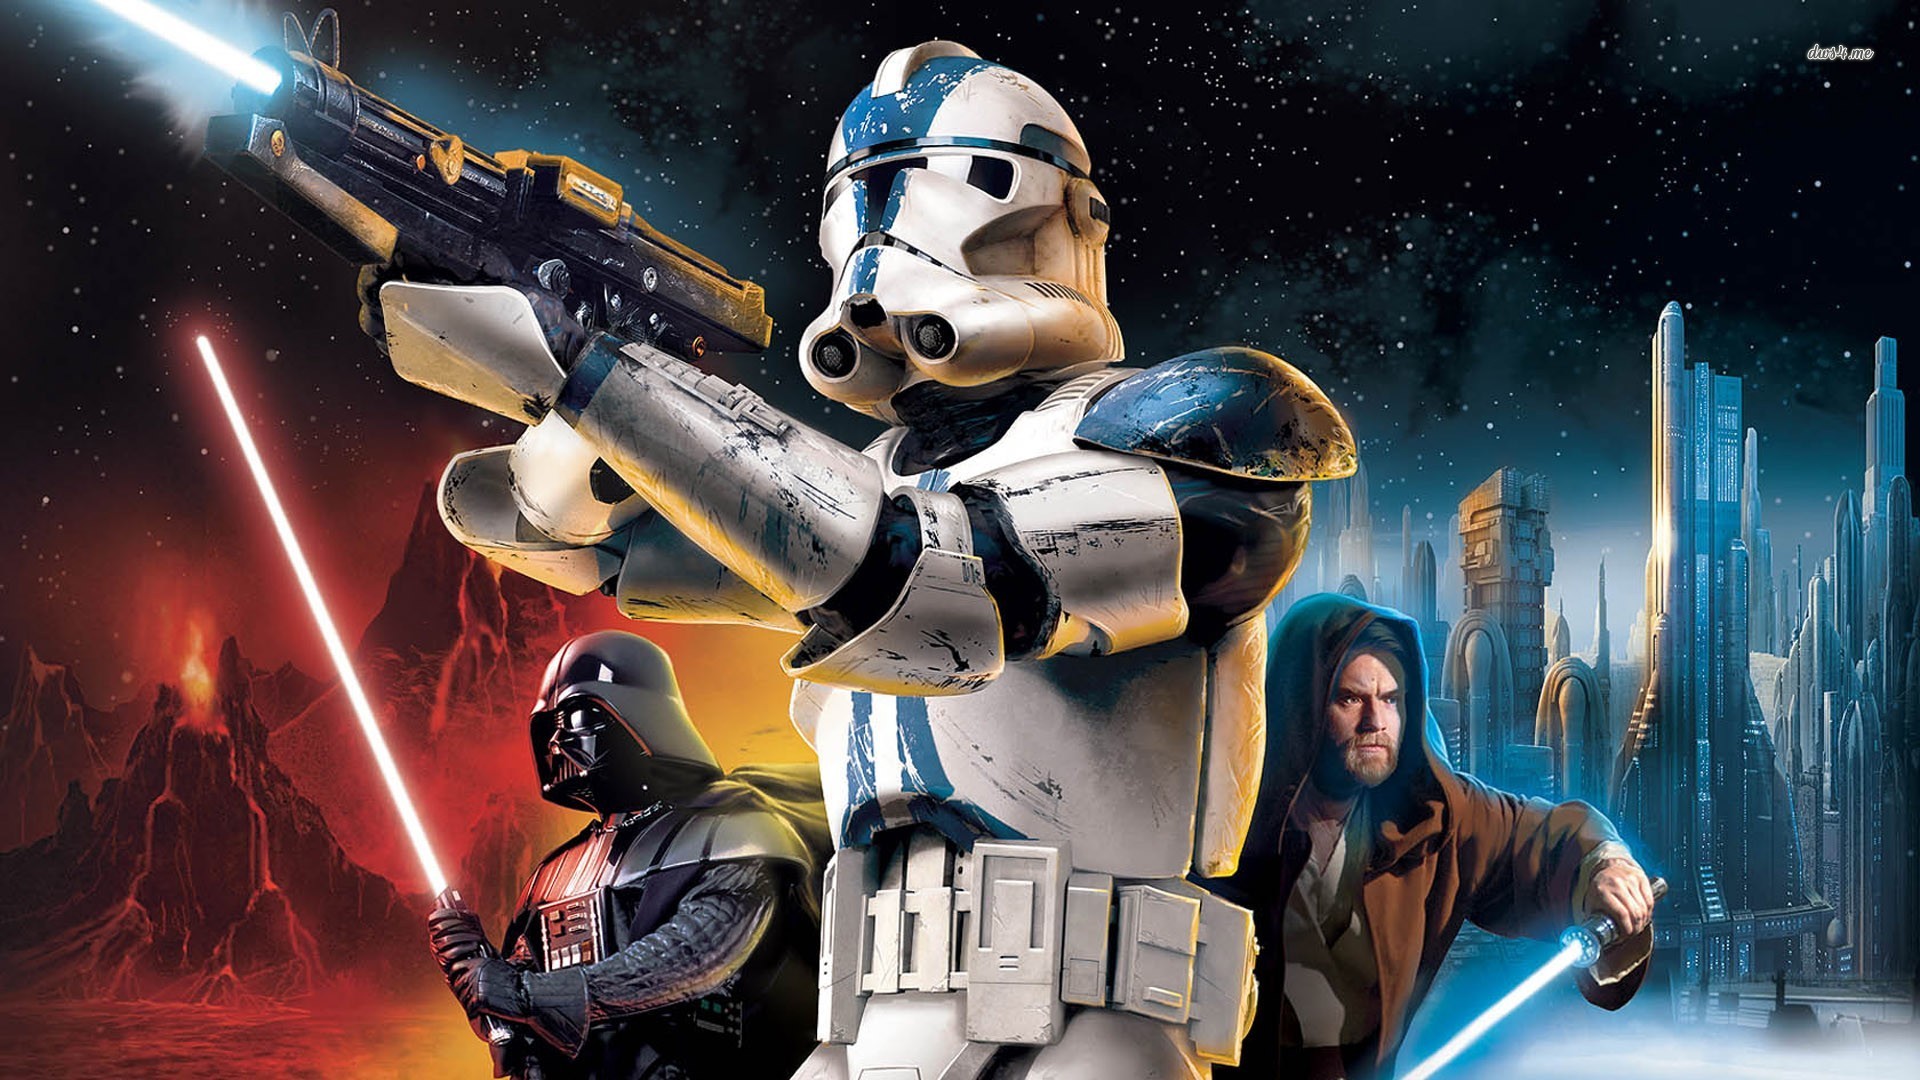 The New Iteration Of Battlefront Takes Place Amid Conflicts